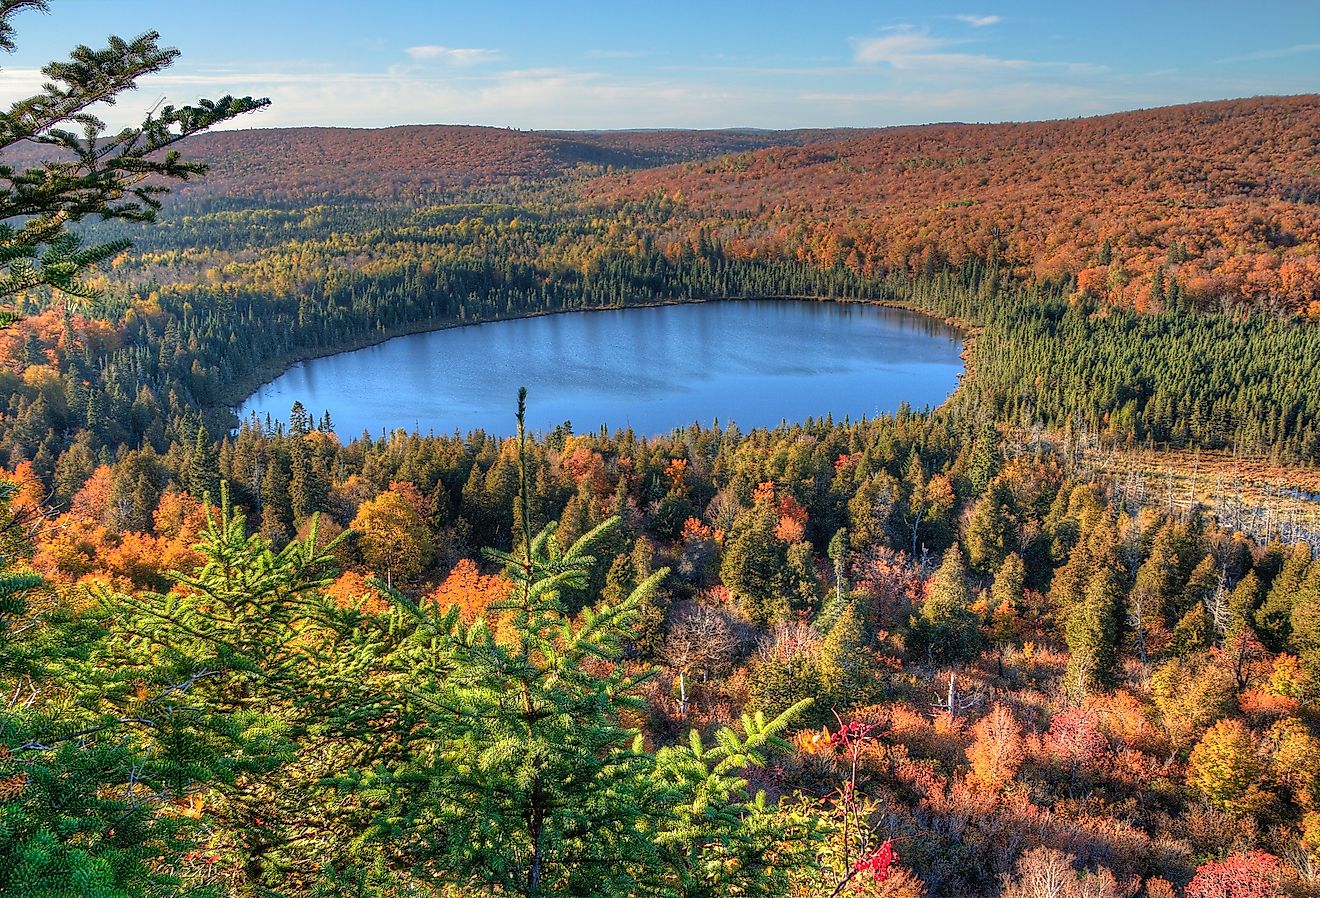 Oberg Mountain - part of the Sawtooth Range on the North Shore in Minnesota. Image credit Jacob via AdobeStock.